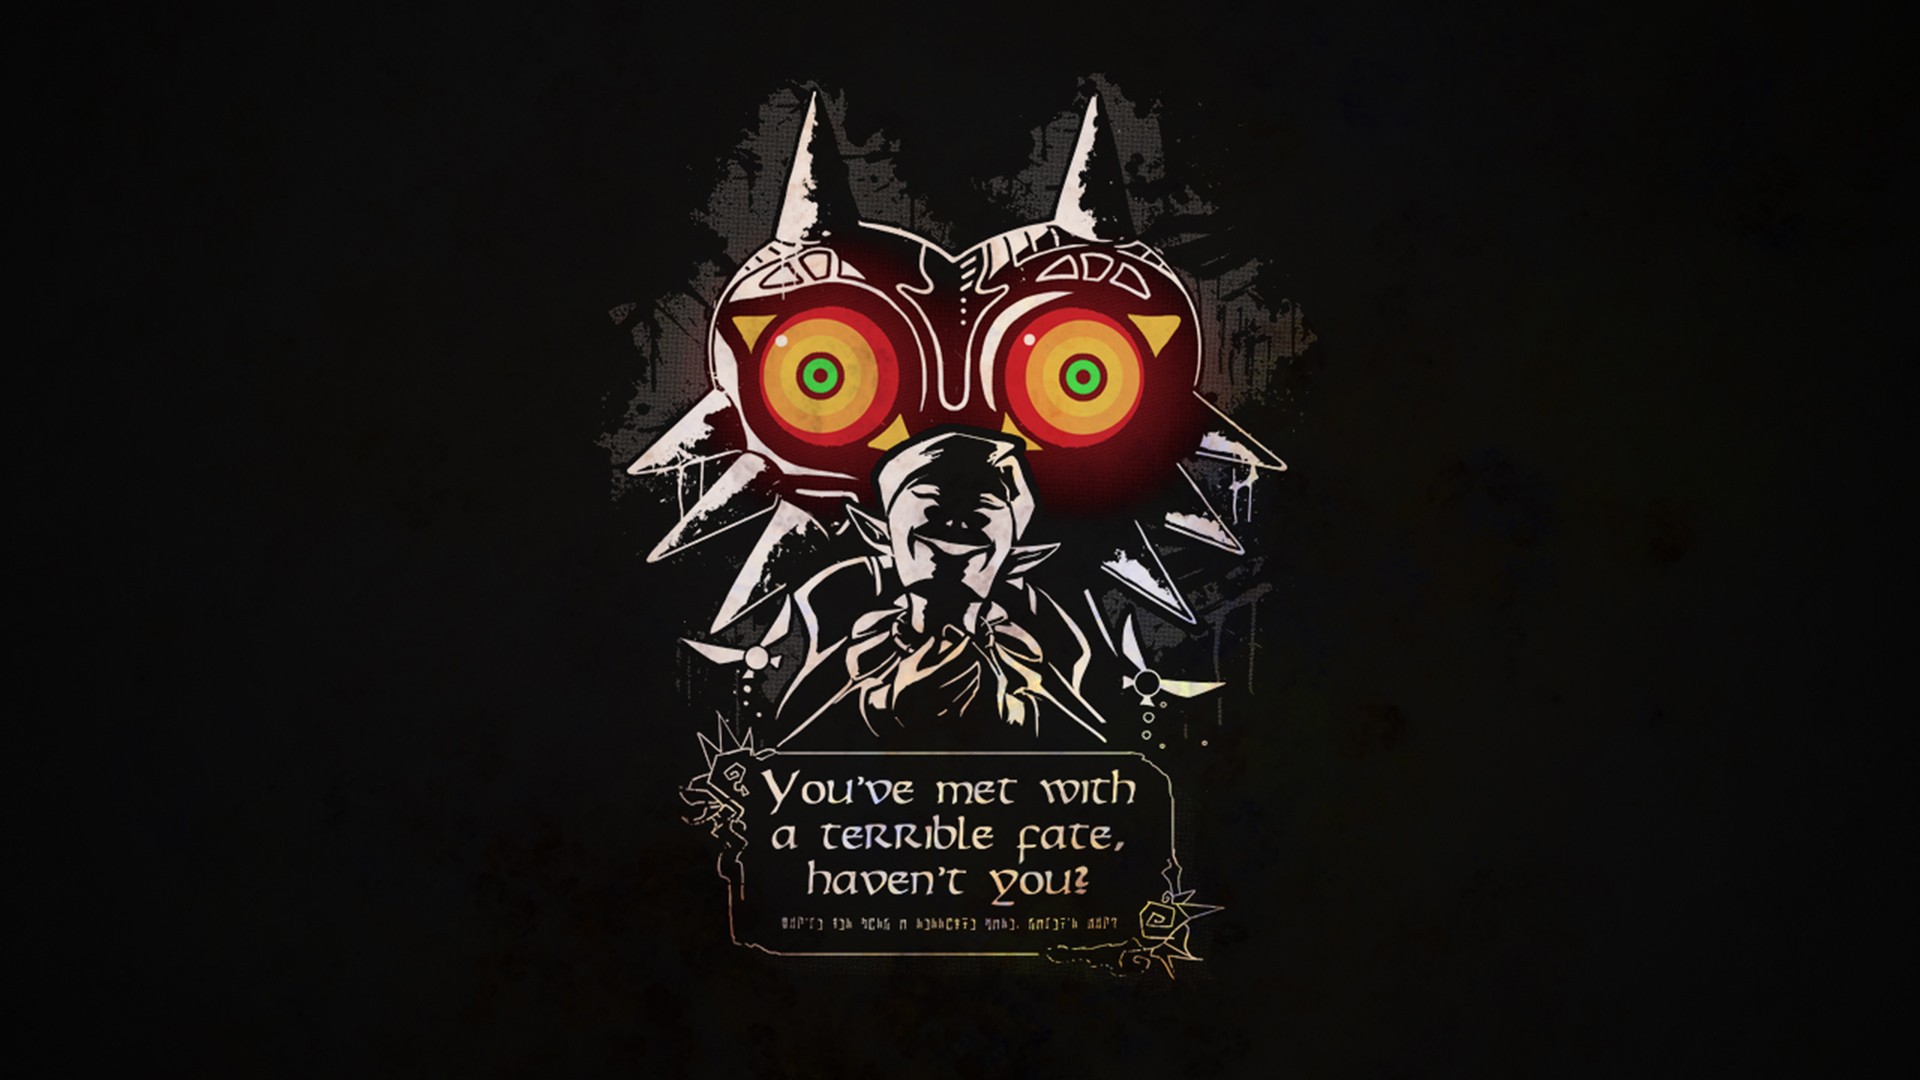 The Legend of Zelda Majoras Mask wallpapers and images   wallpapers 1920x1080